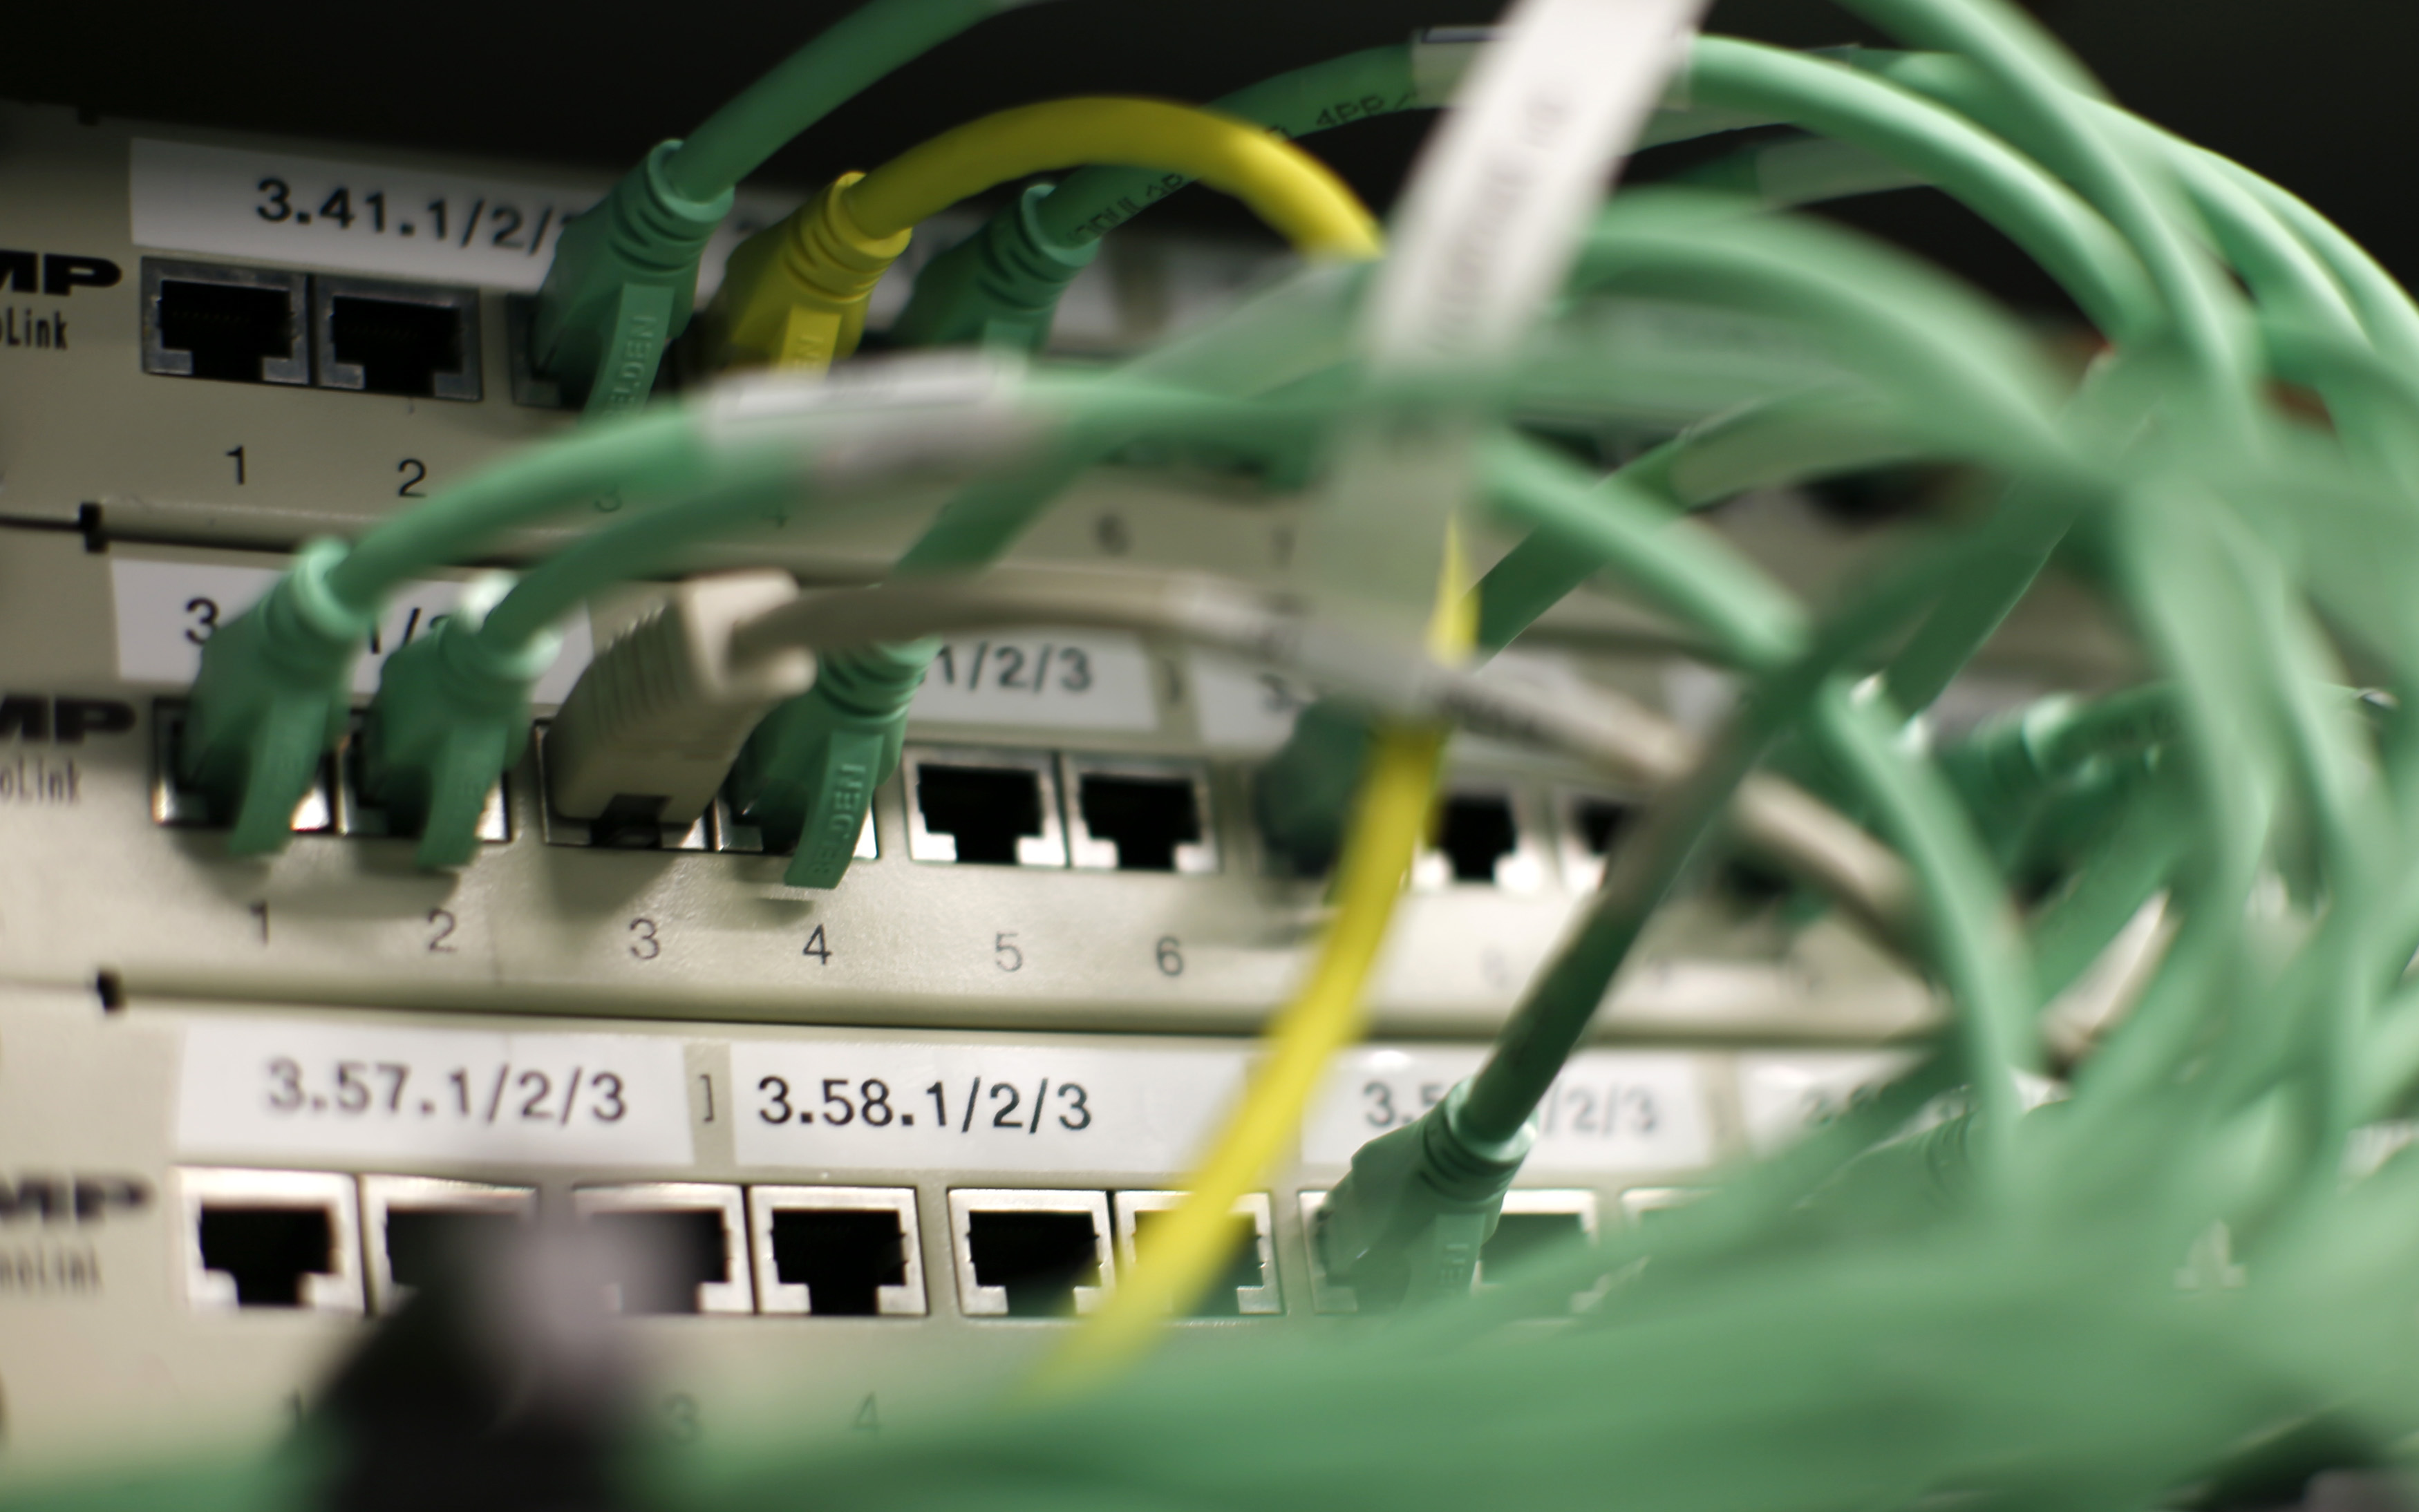 FILE - An image showing Ethernet cables used for internet connections. (Reuters)